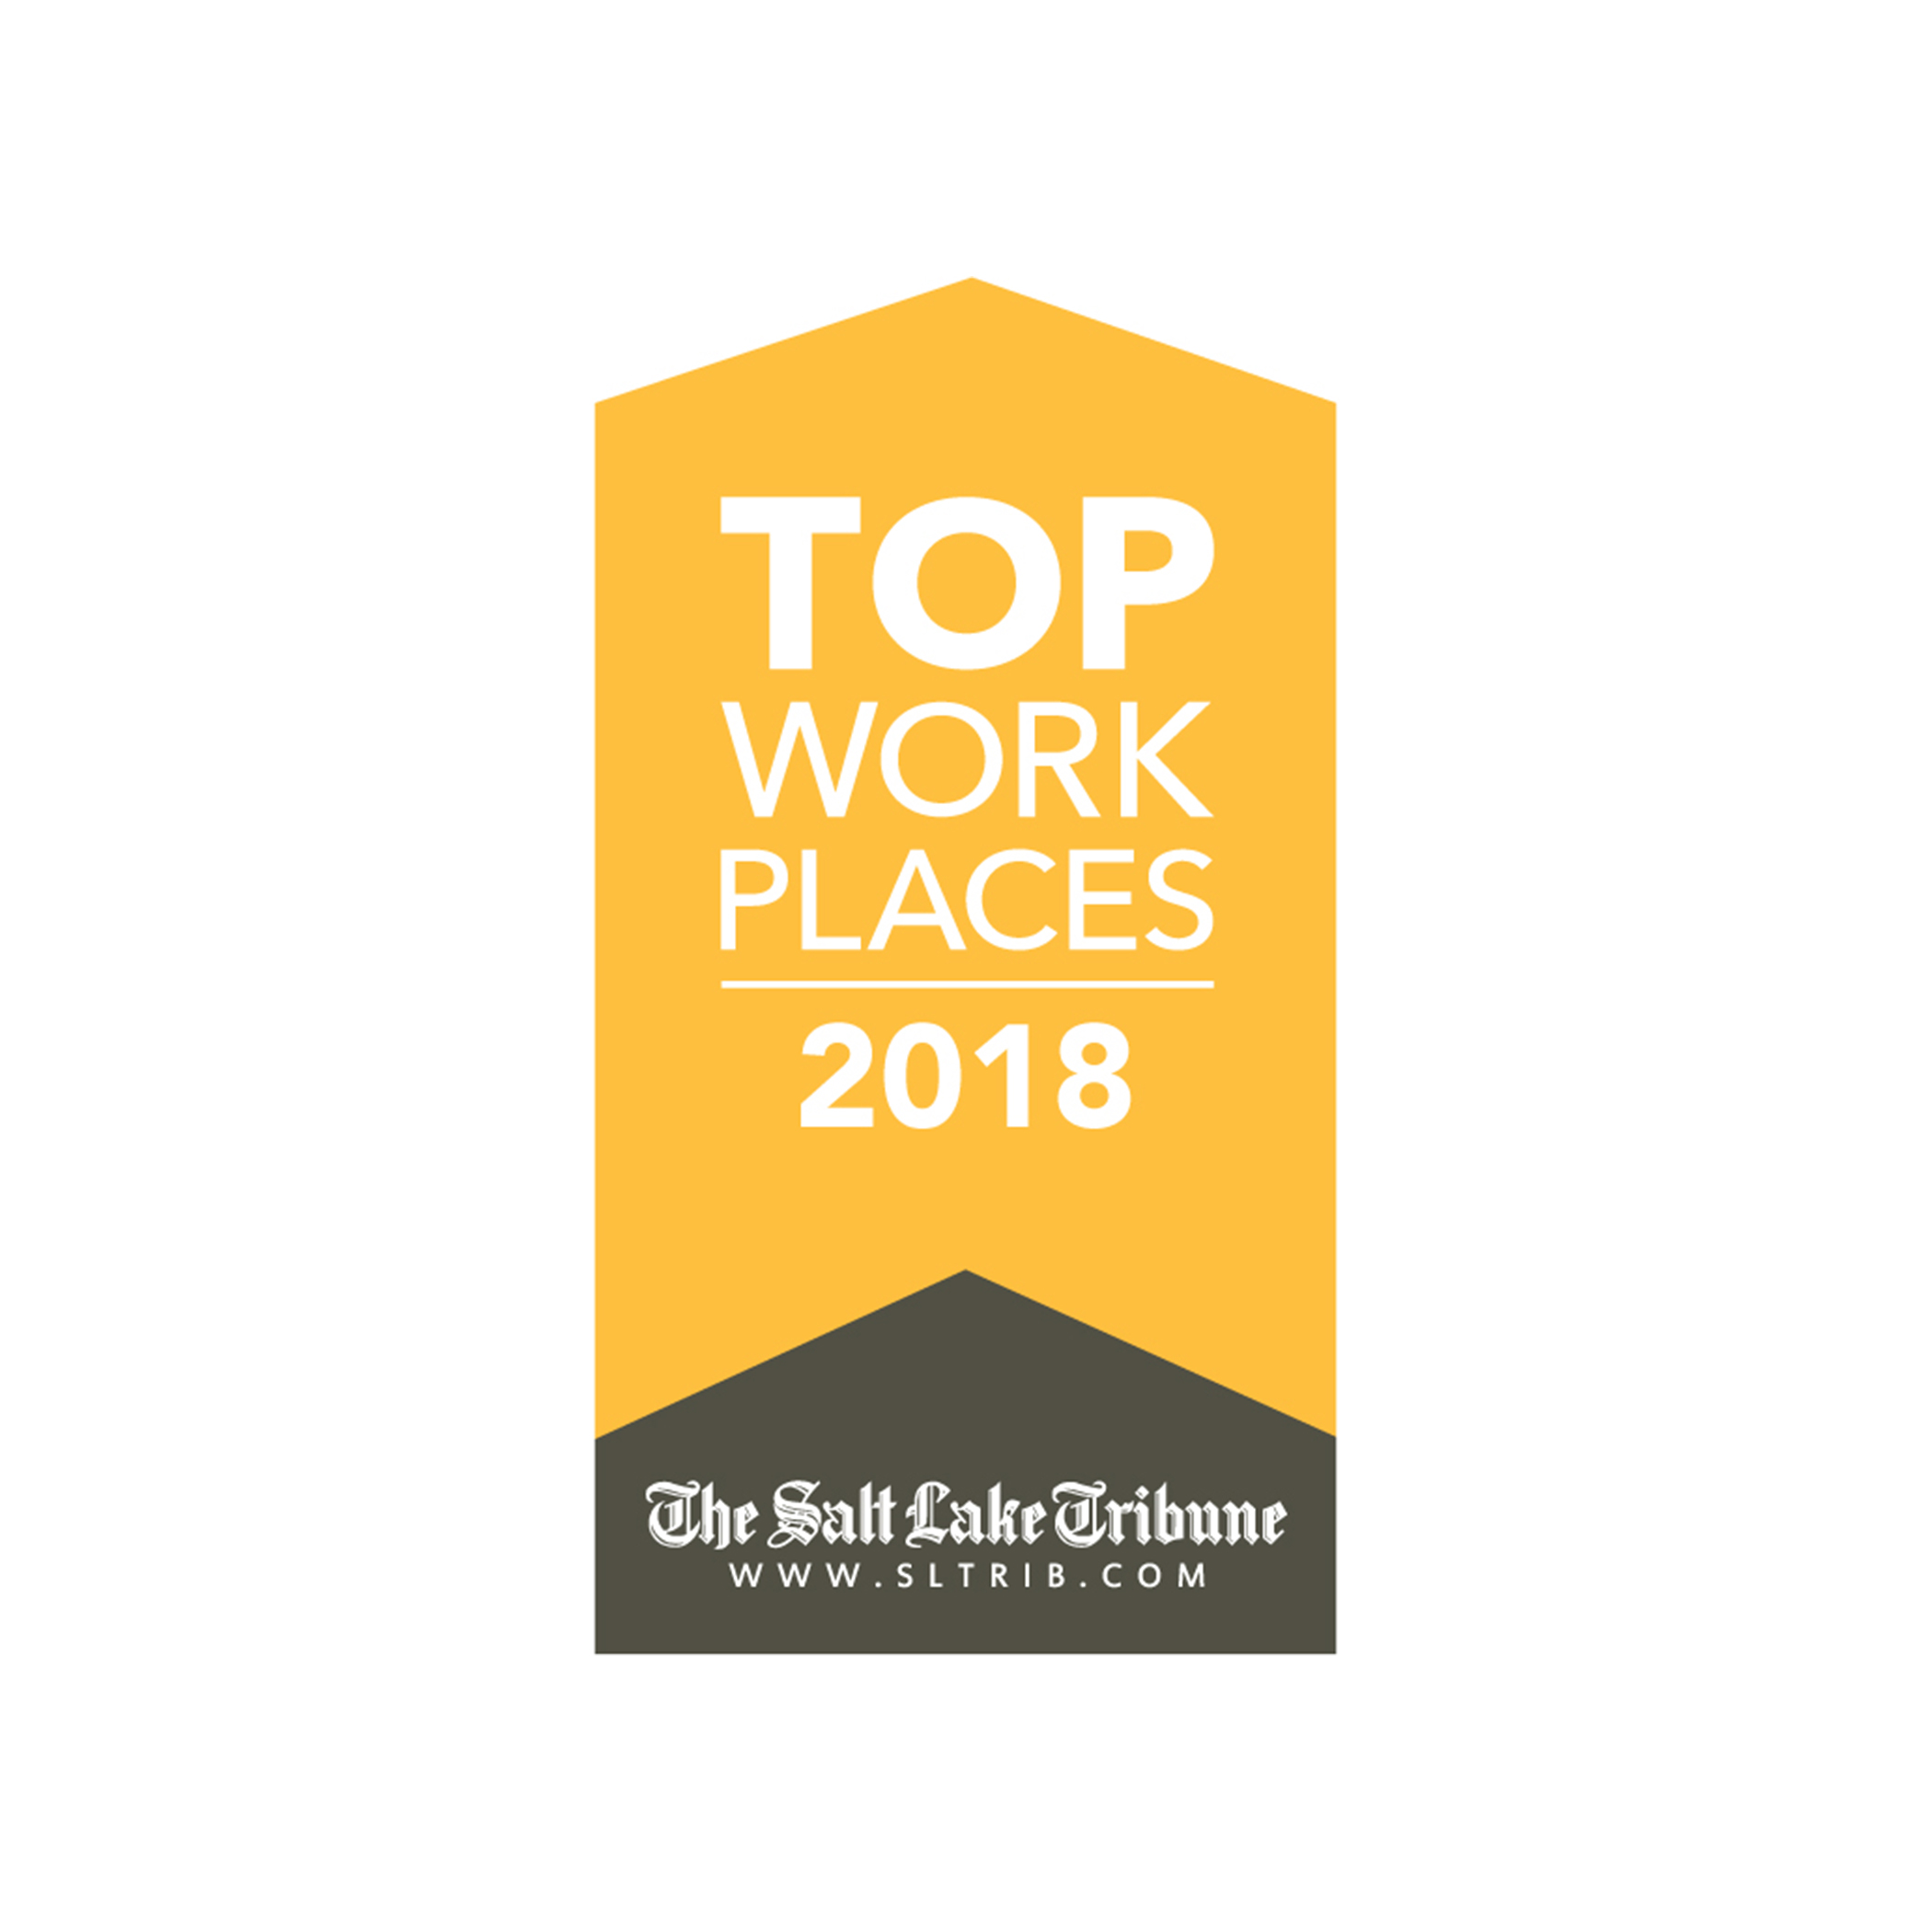  Named 2018 Top Workplace and Top Leadership by The Salt Lake Tribune